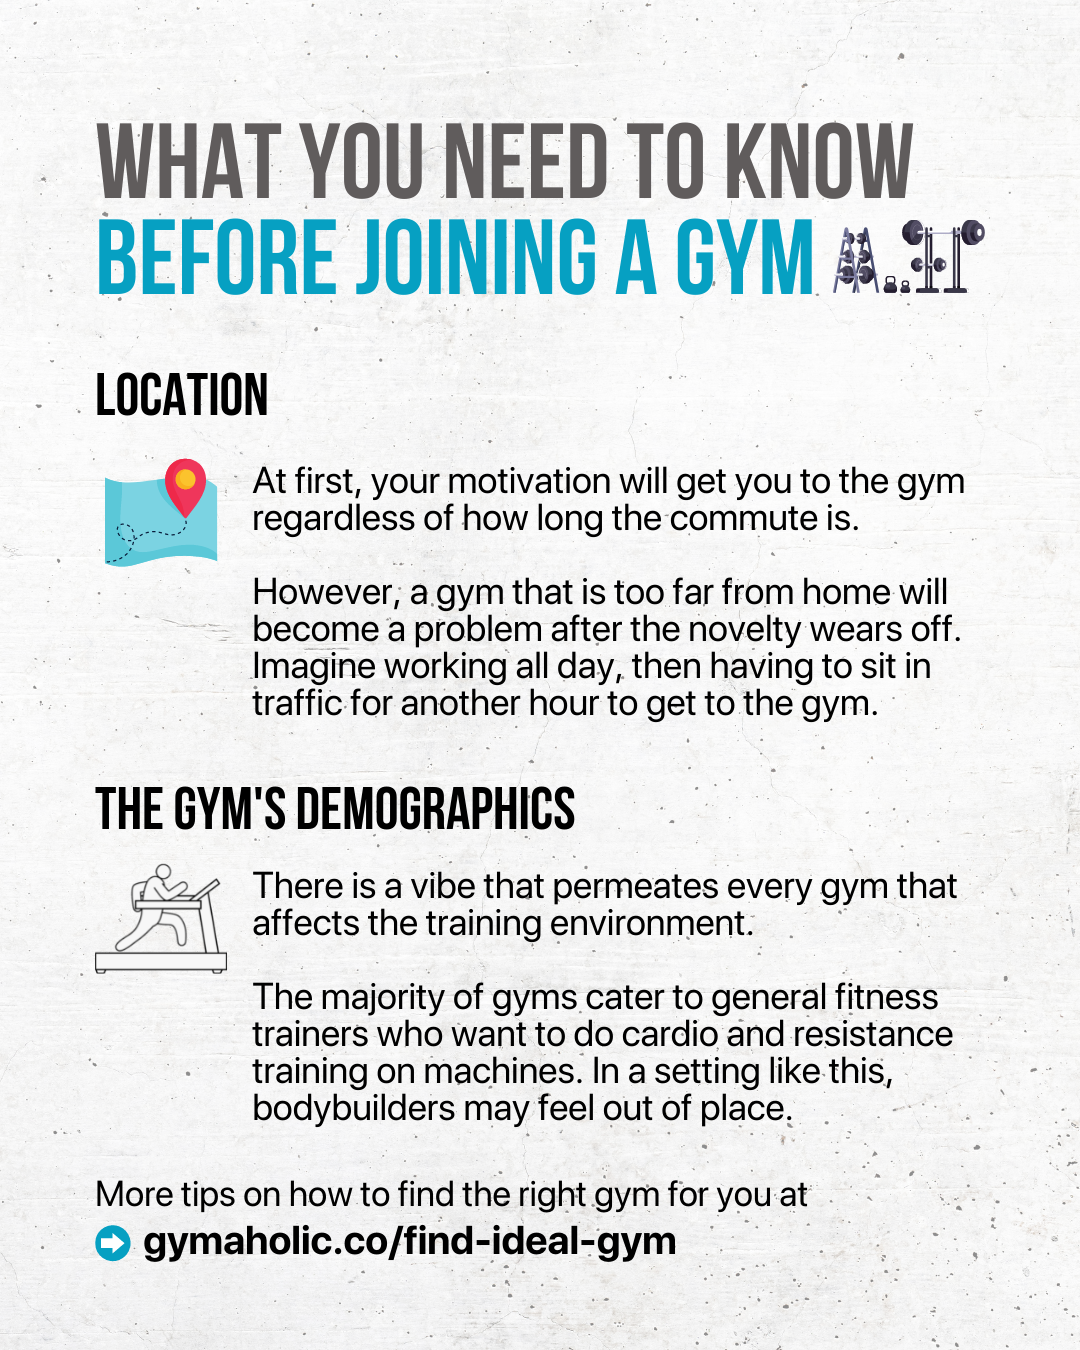 What you need to know before joining a gym